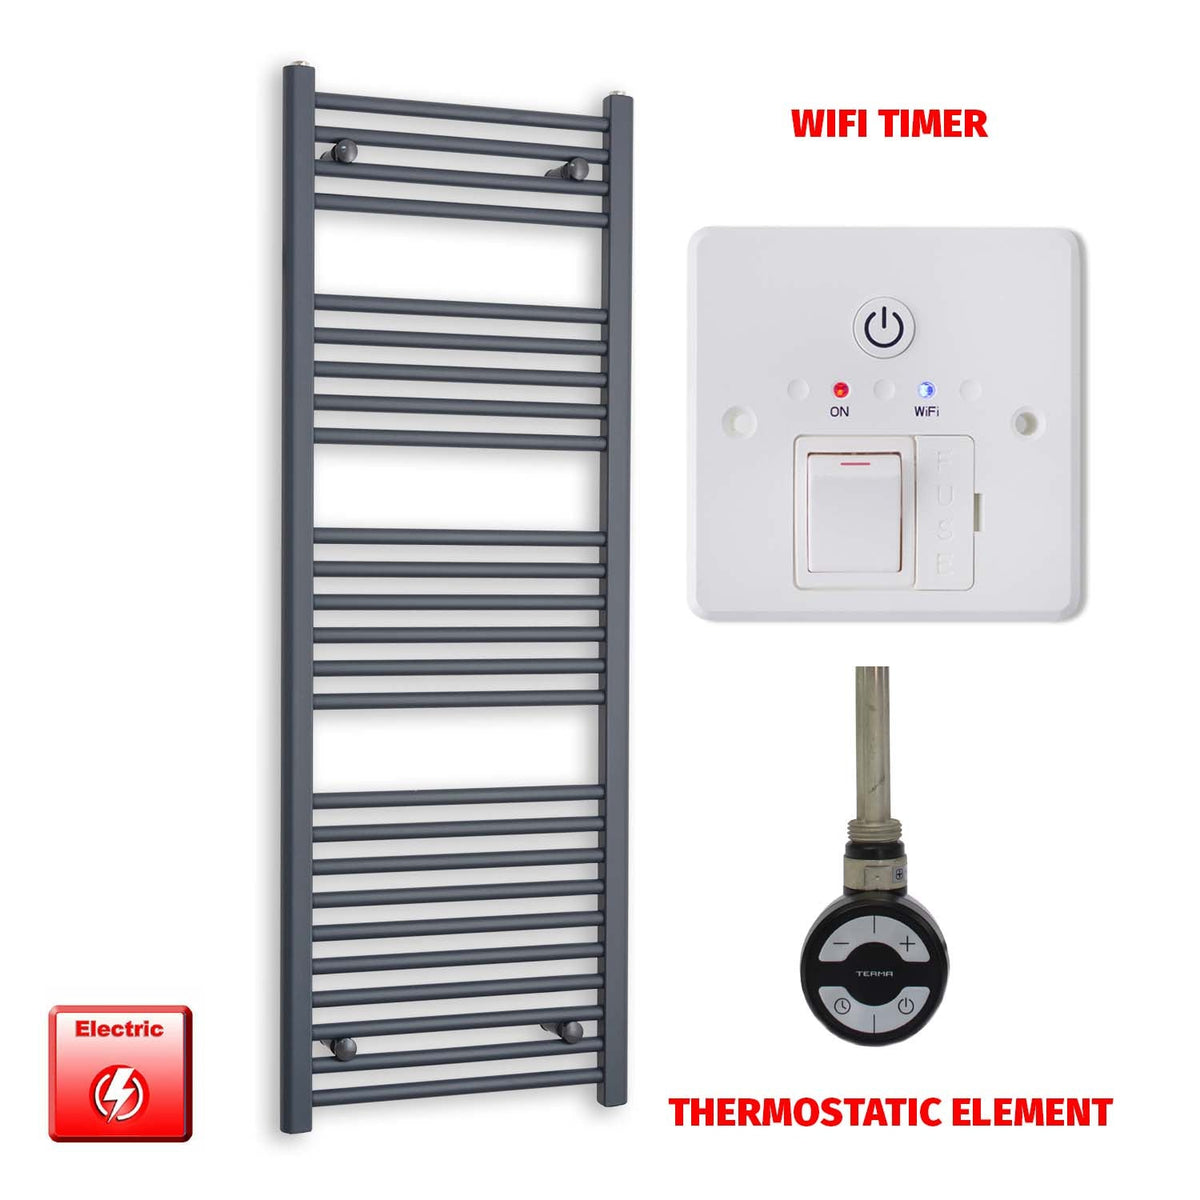 1400mm High 500mm Wide Flat Anthracite Pre-Filled Electric Heated Towel Rail Radiator HTR MOA Thermostatic element Wifi timer